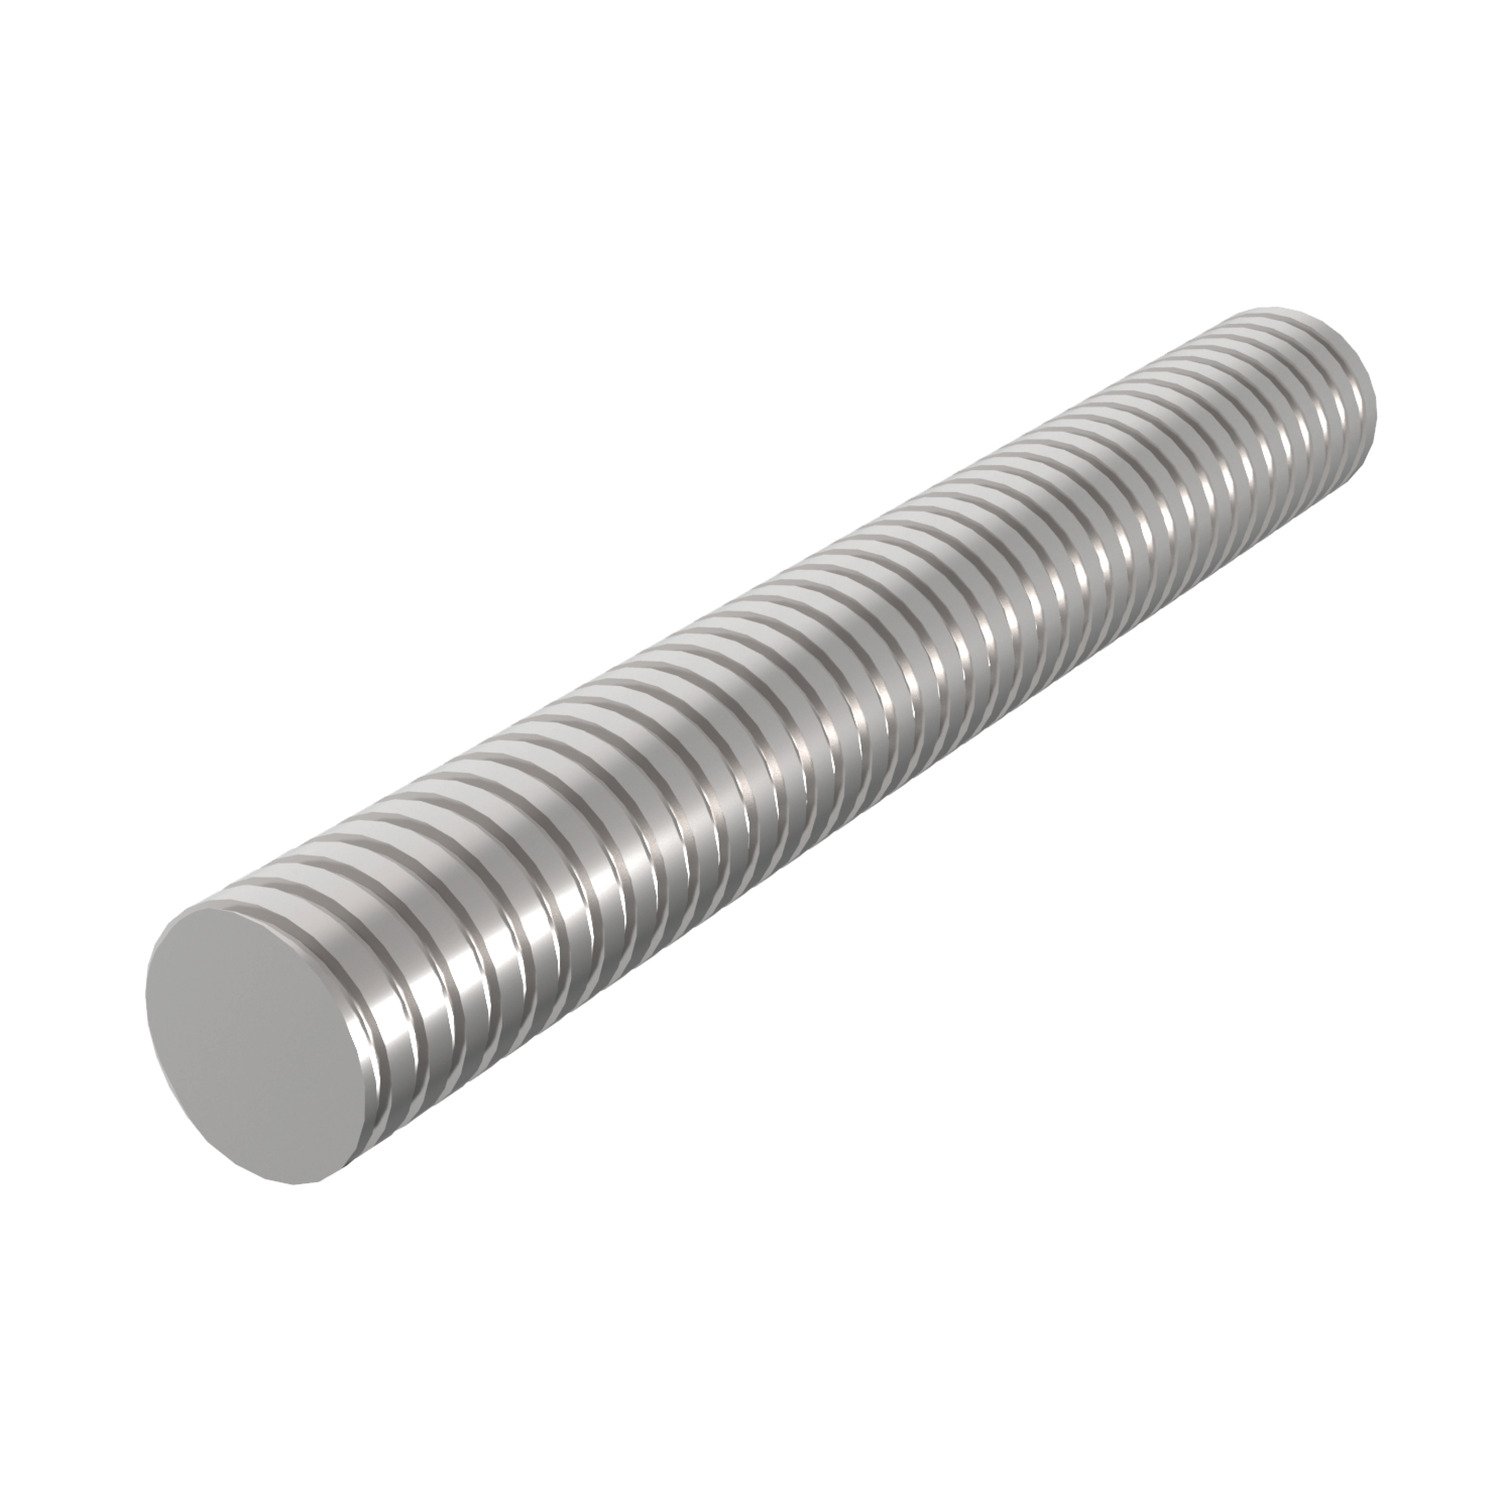 Product L1325, Stainless 304 Lead Screws right hand thread / 